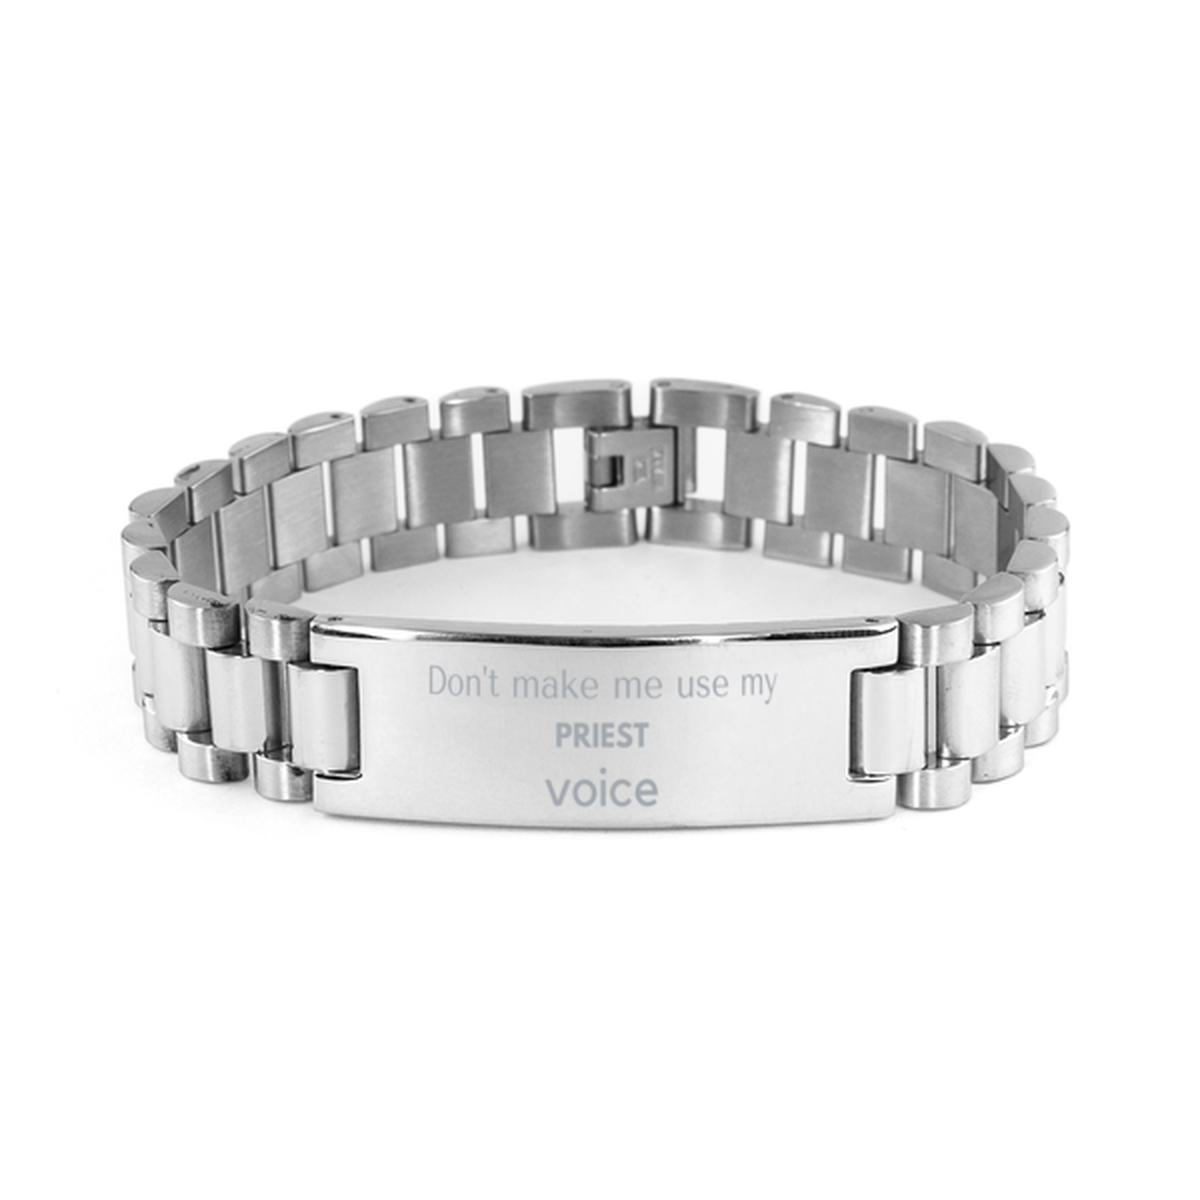 Don't make me use my Priest voice, Sarcasm Priest Gifts, Christmas Priest Ladder Stainless Steel Bracelet Birthday Unique Gifts For Priest Coworkers, Men, Women, Colleague, Friends